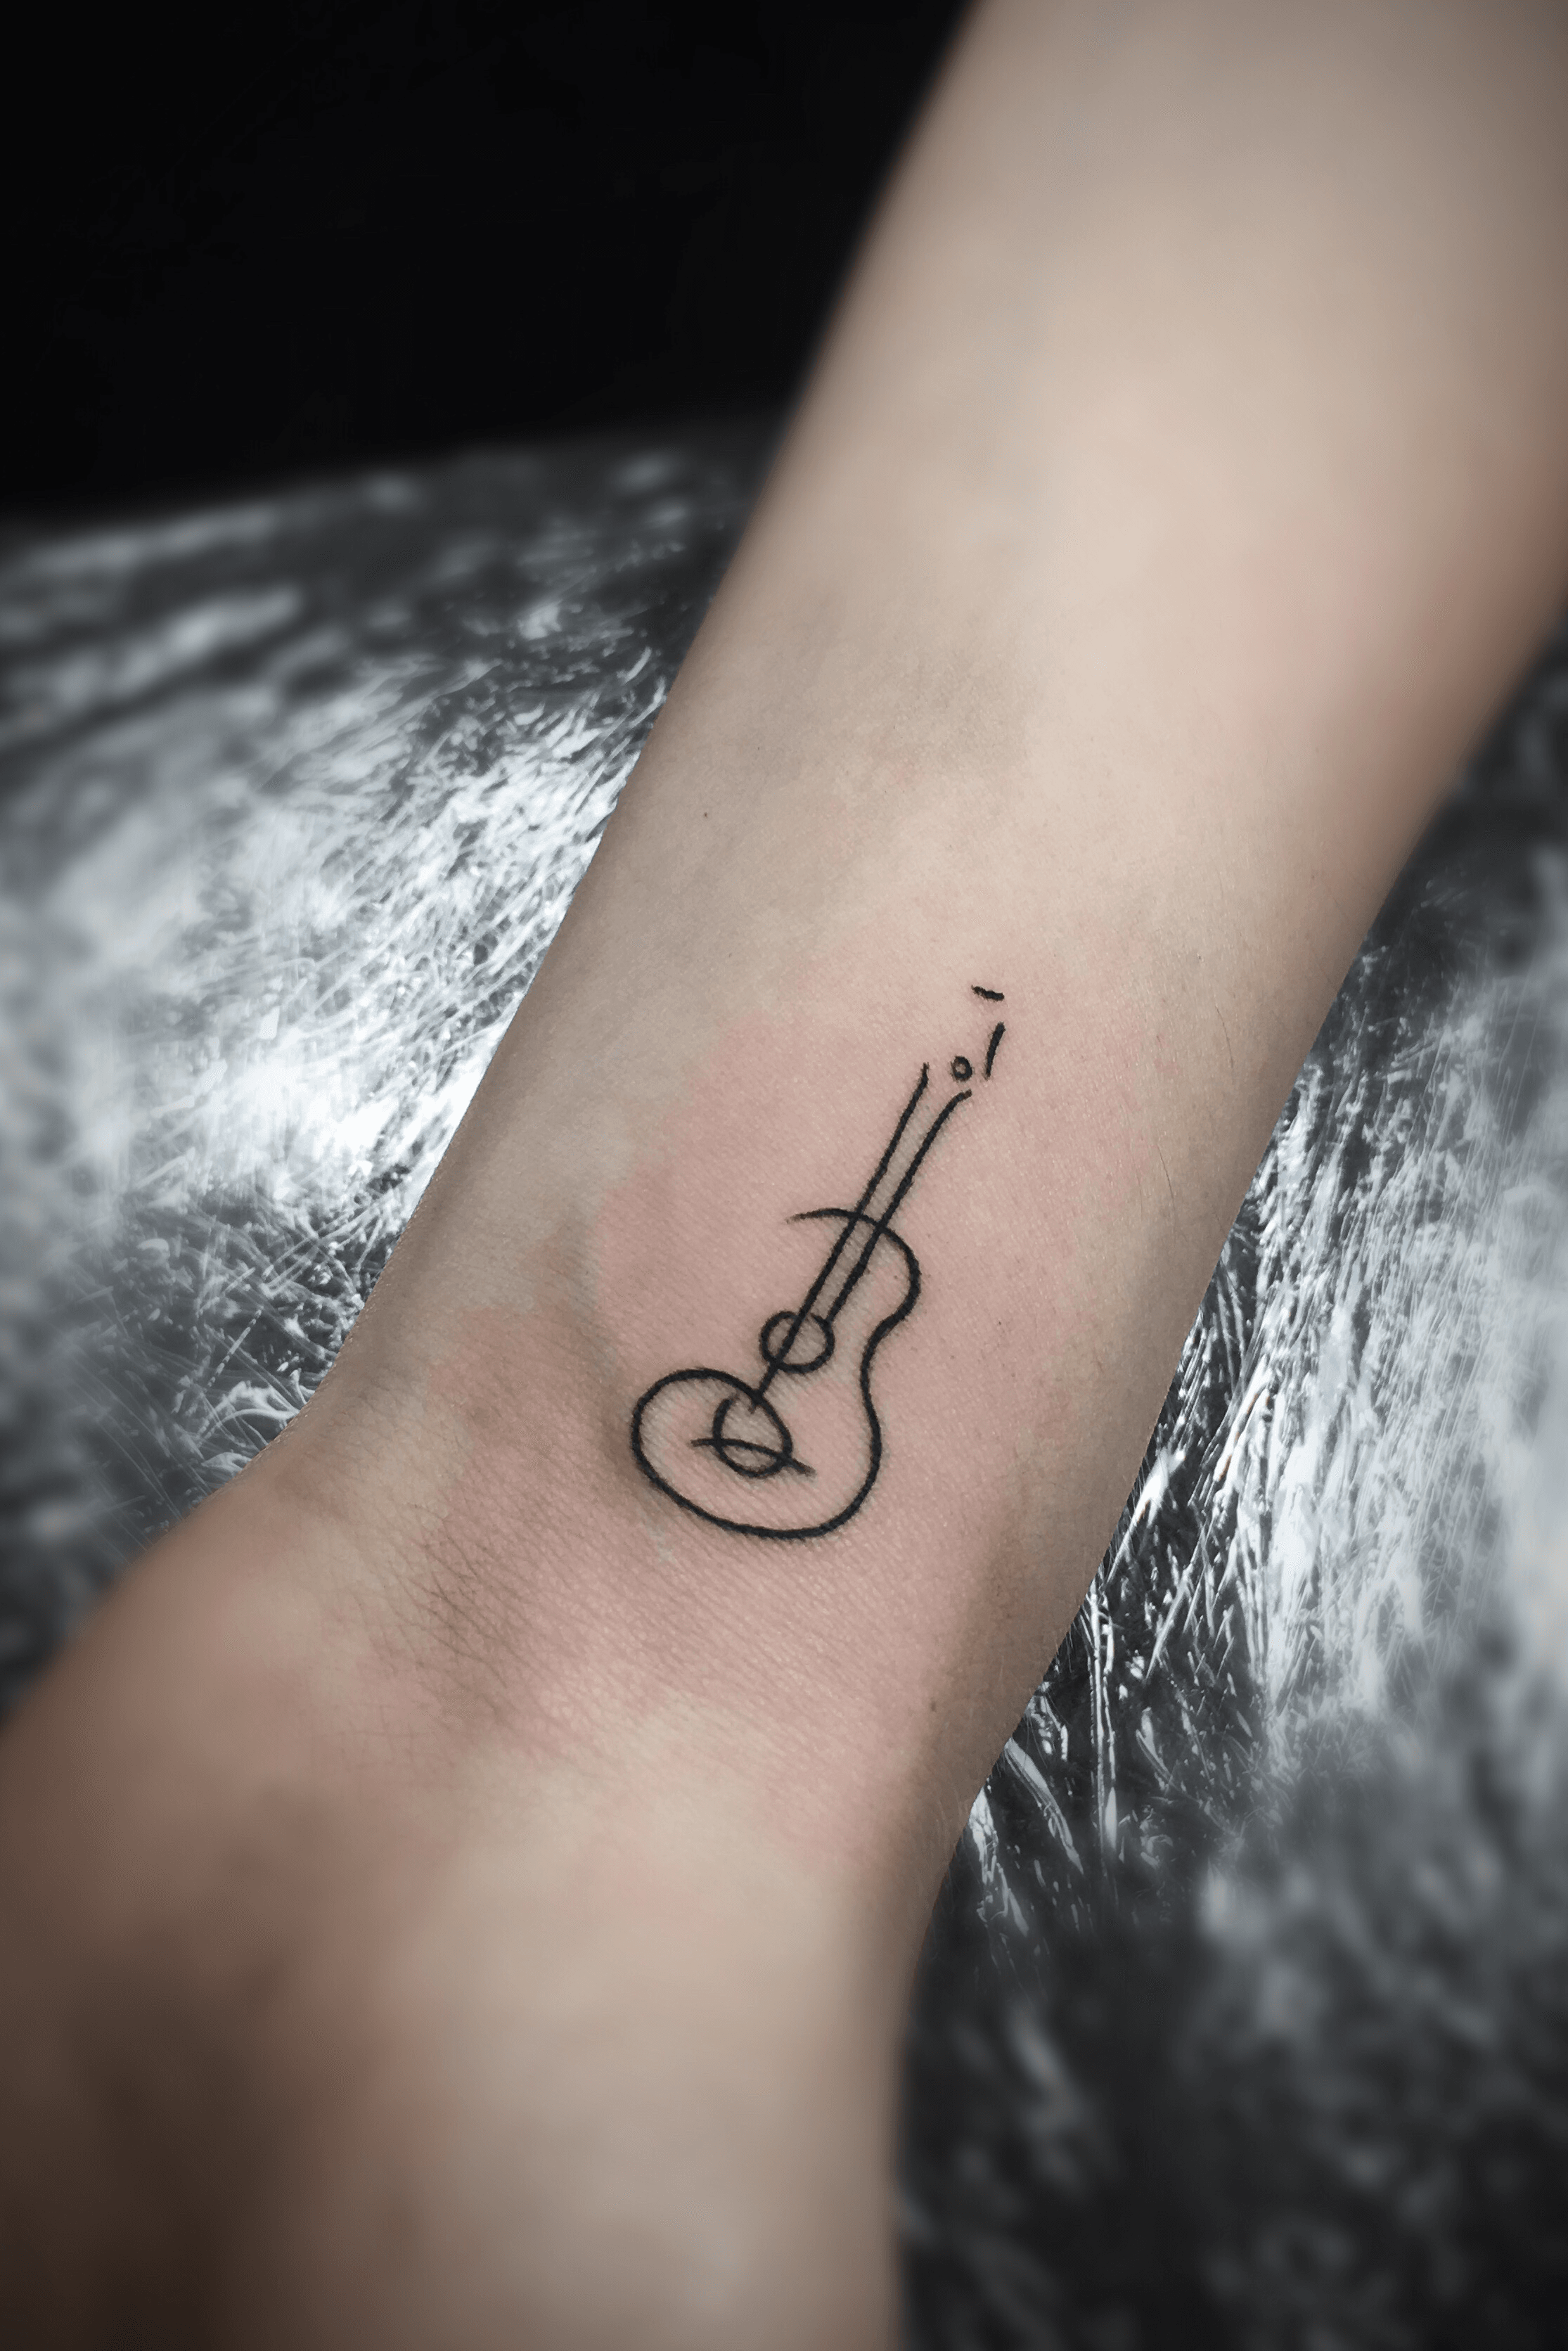 101 Awesome Guitar Tattoo Ideas You Need To See  Guitar tattoo Music  tattoo designs Guitar tattoo design